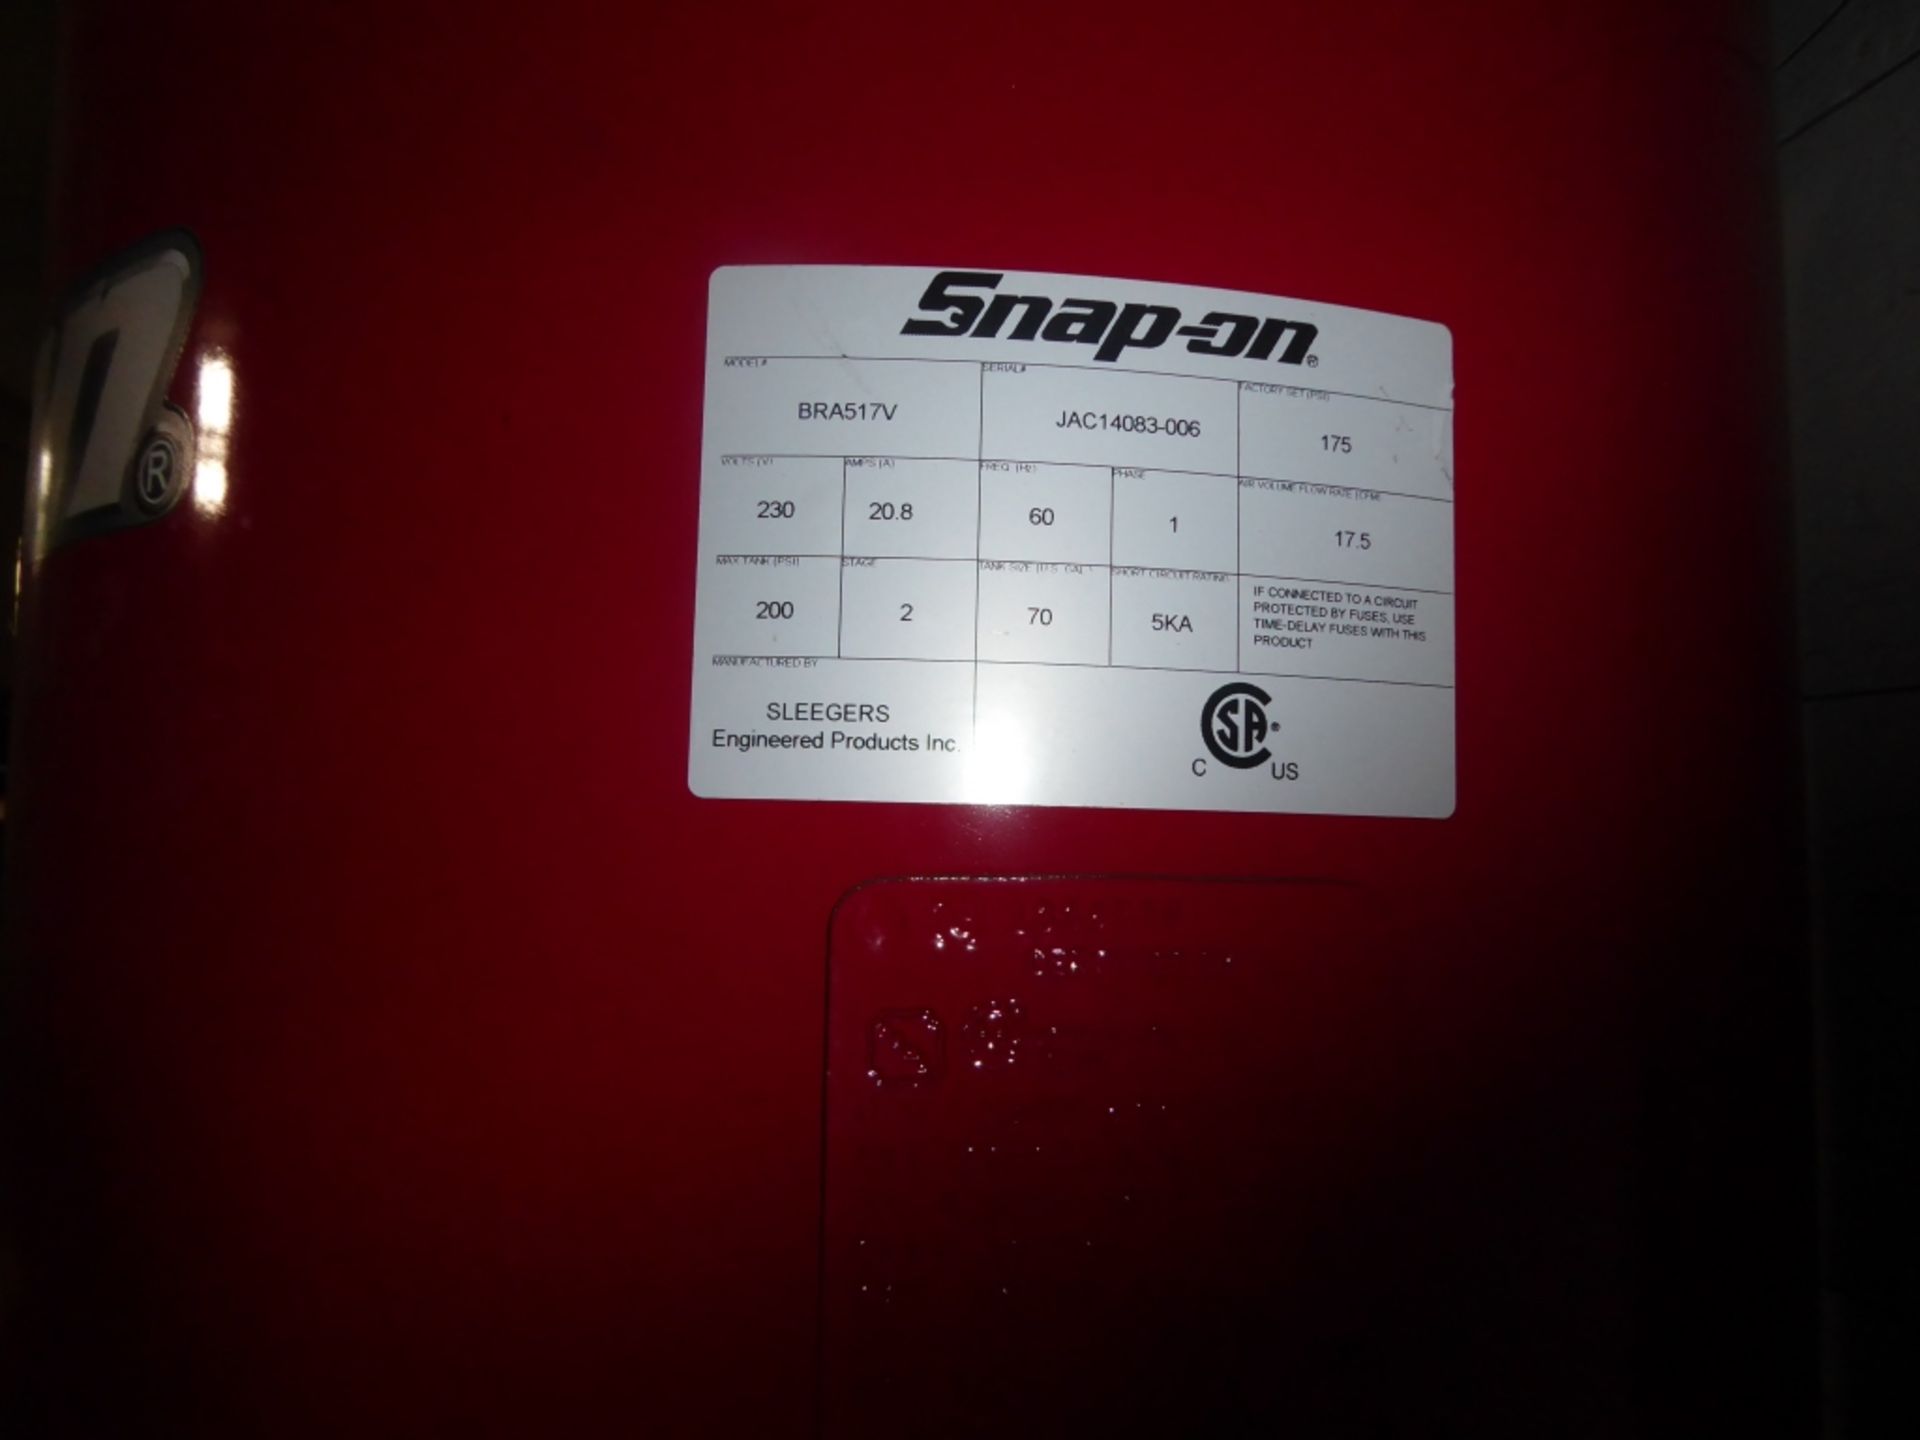 Snap On 5 HP 70 Gallon Air Compressor Nearly new air compressor which retails at $3,695.00 on Snap - Image 4 of 4